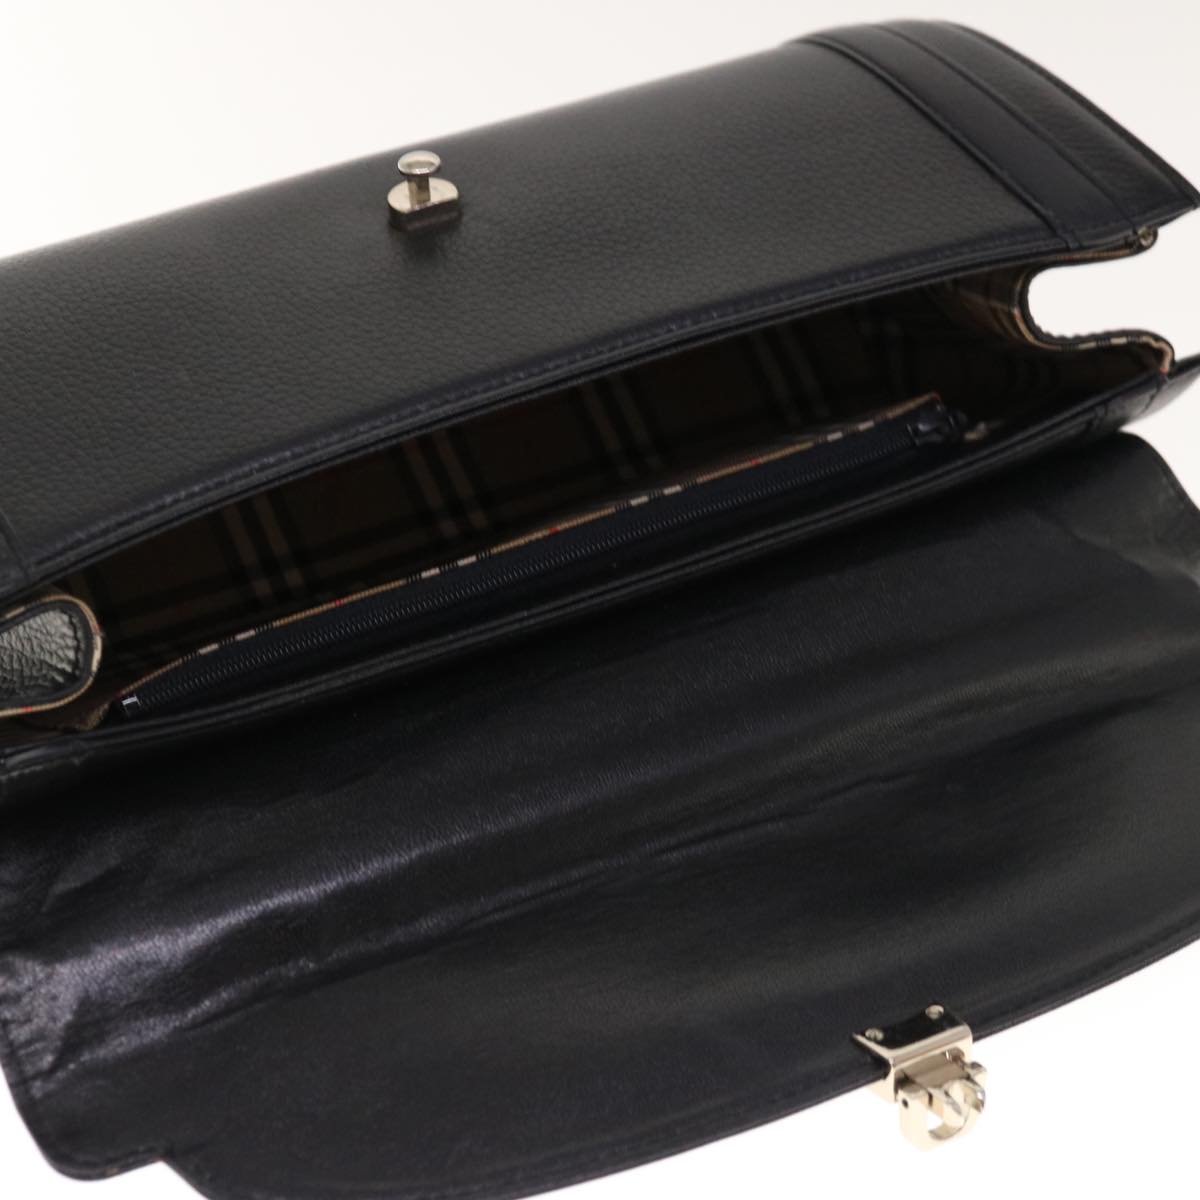 Burberrys Hand Bag Leather Black Auth 65297